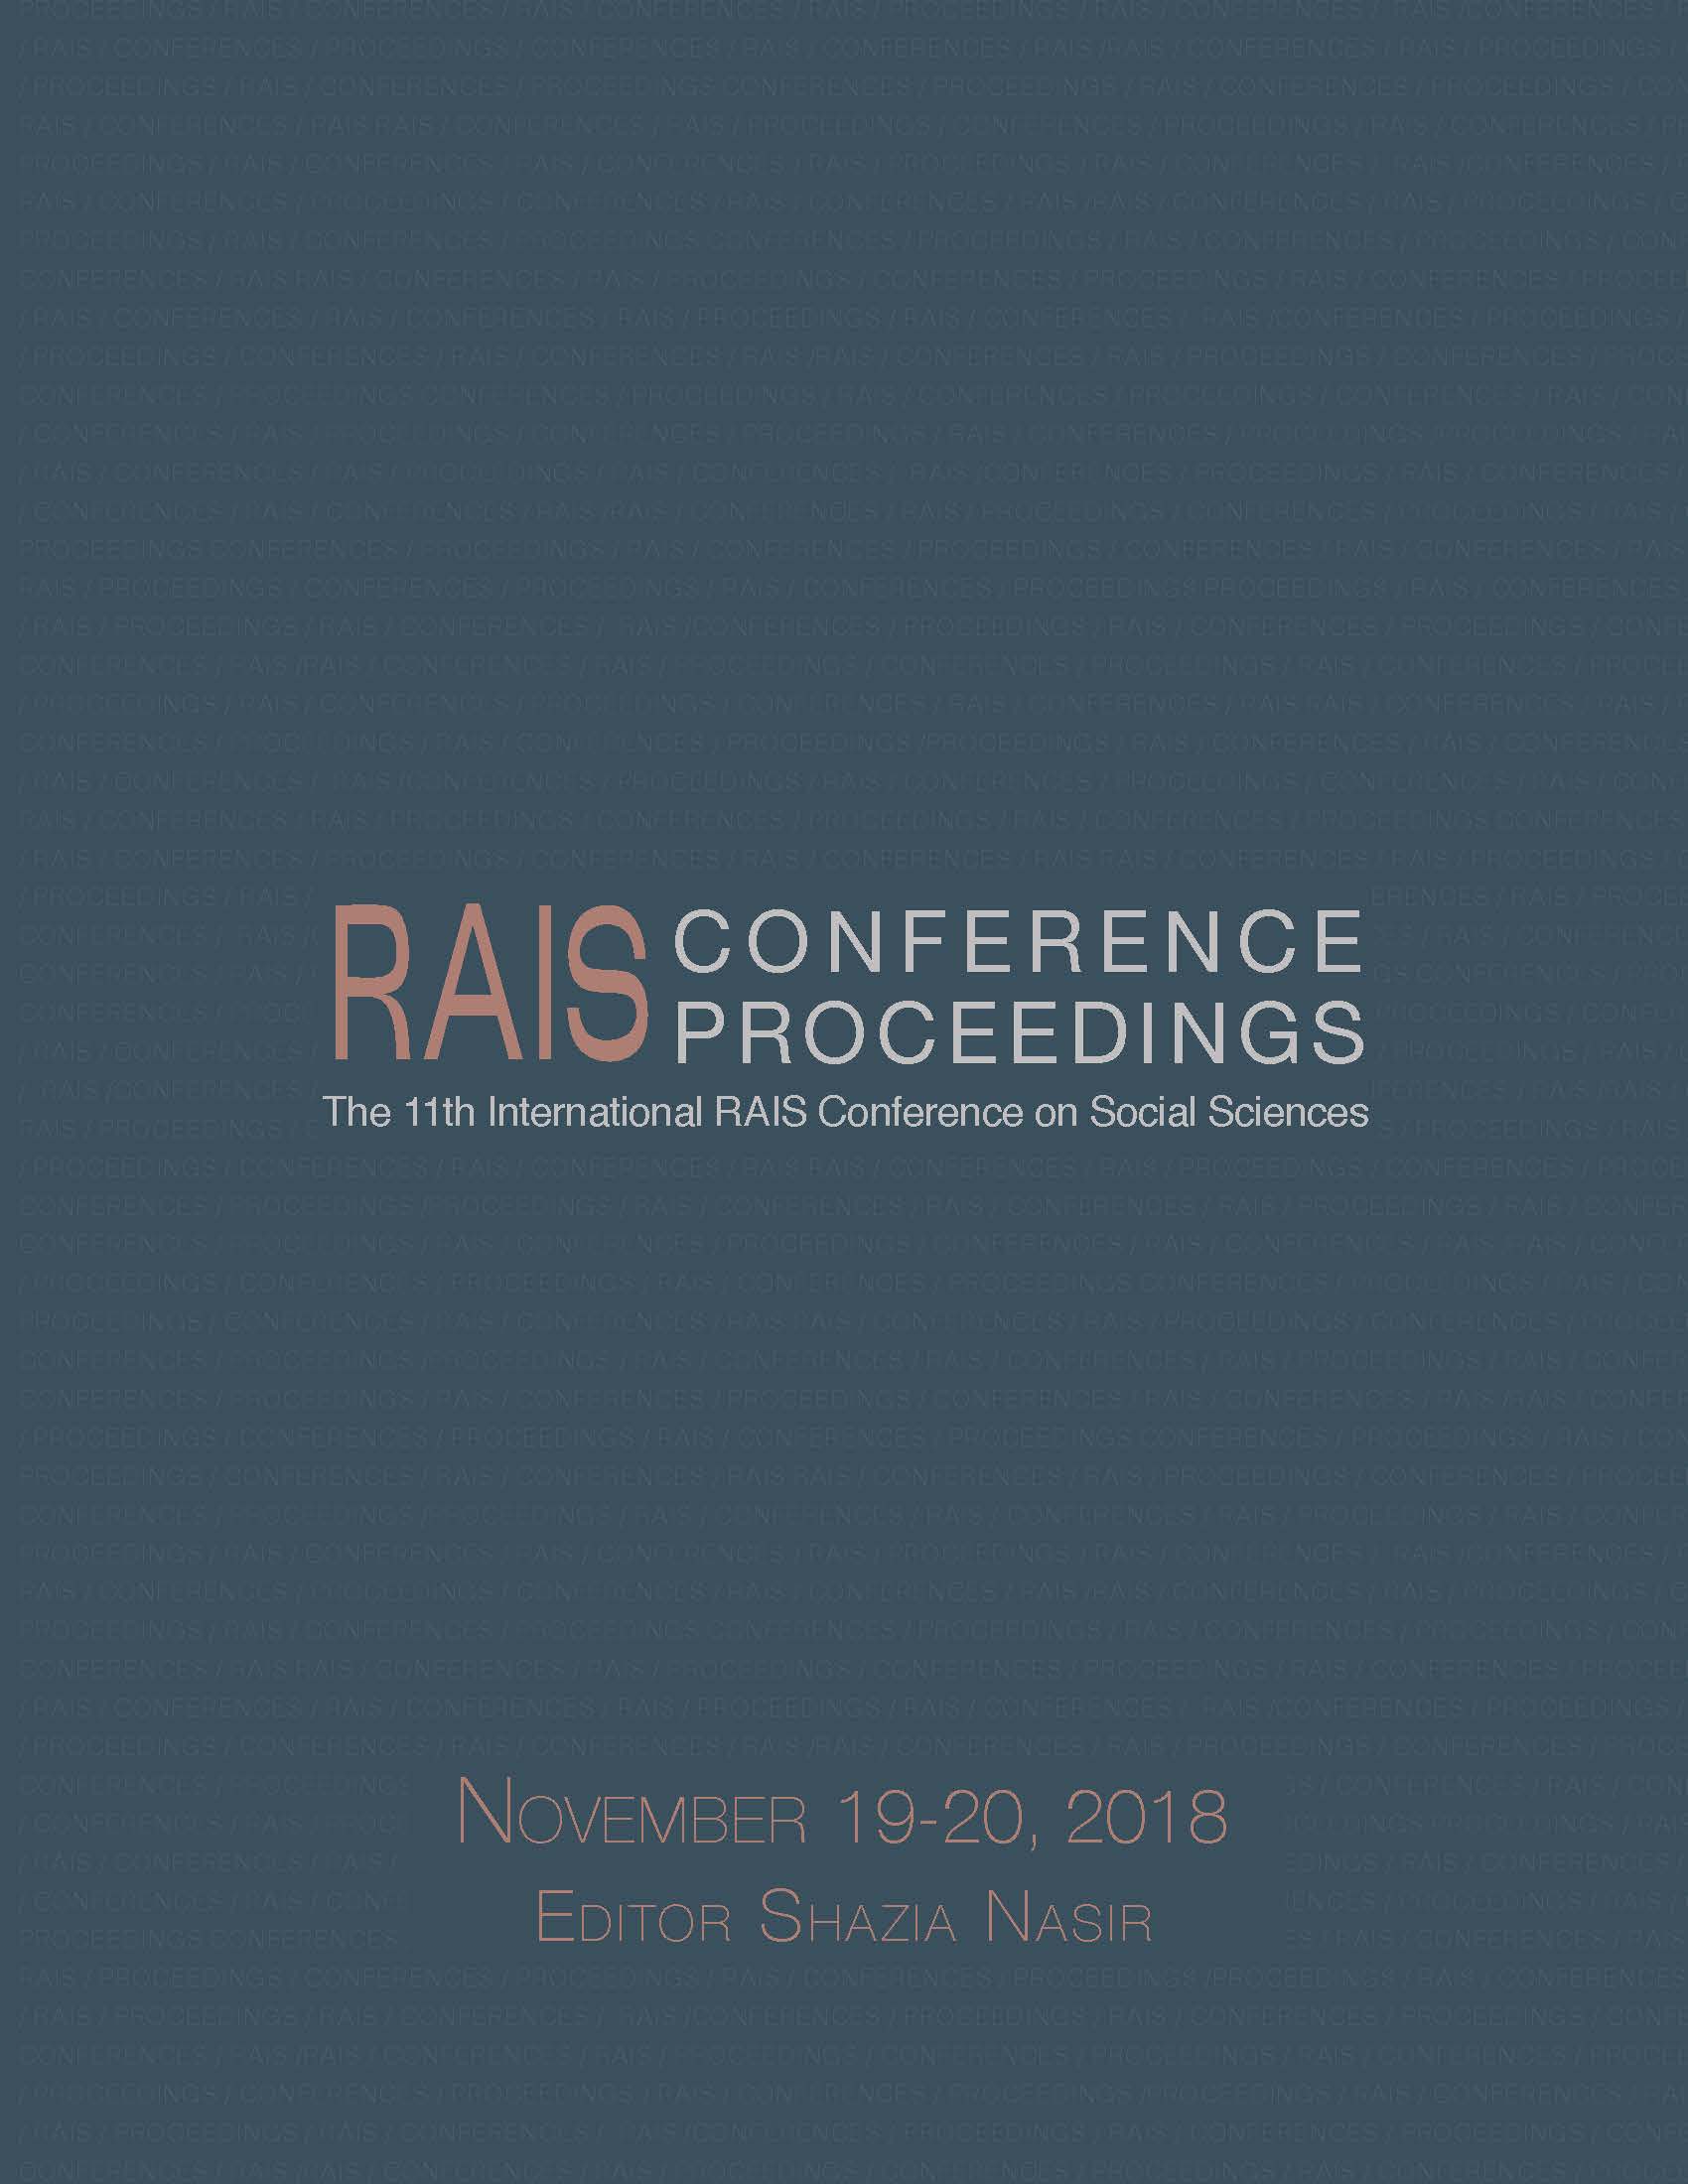 Proceedings of the 11th International RAIS Conference on Social Sciences